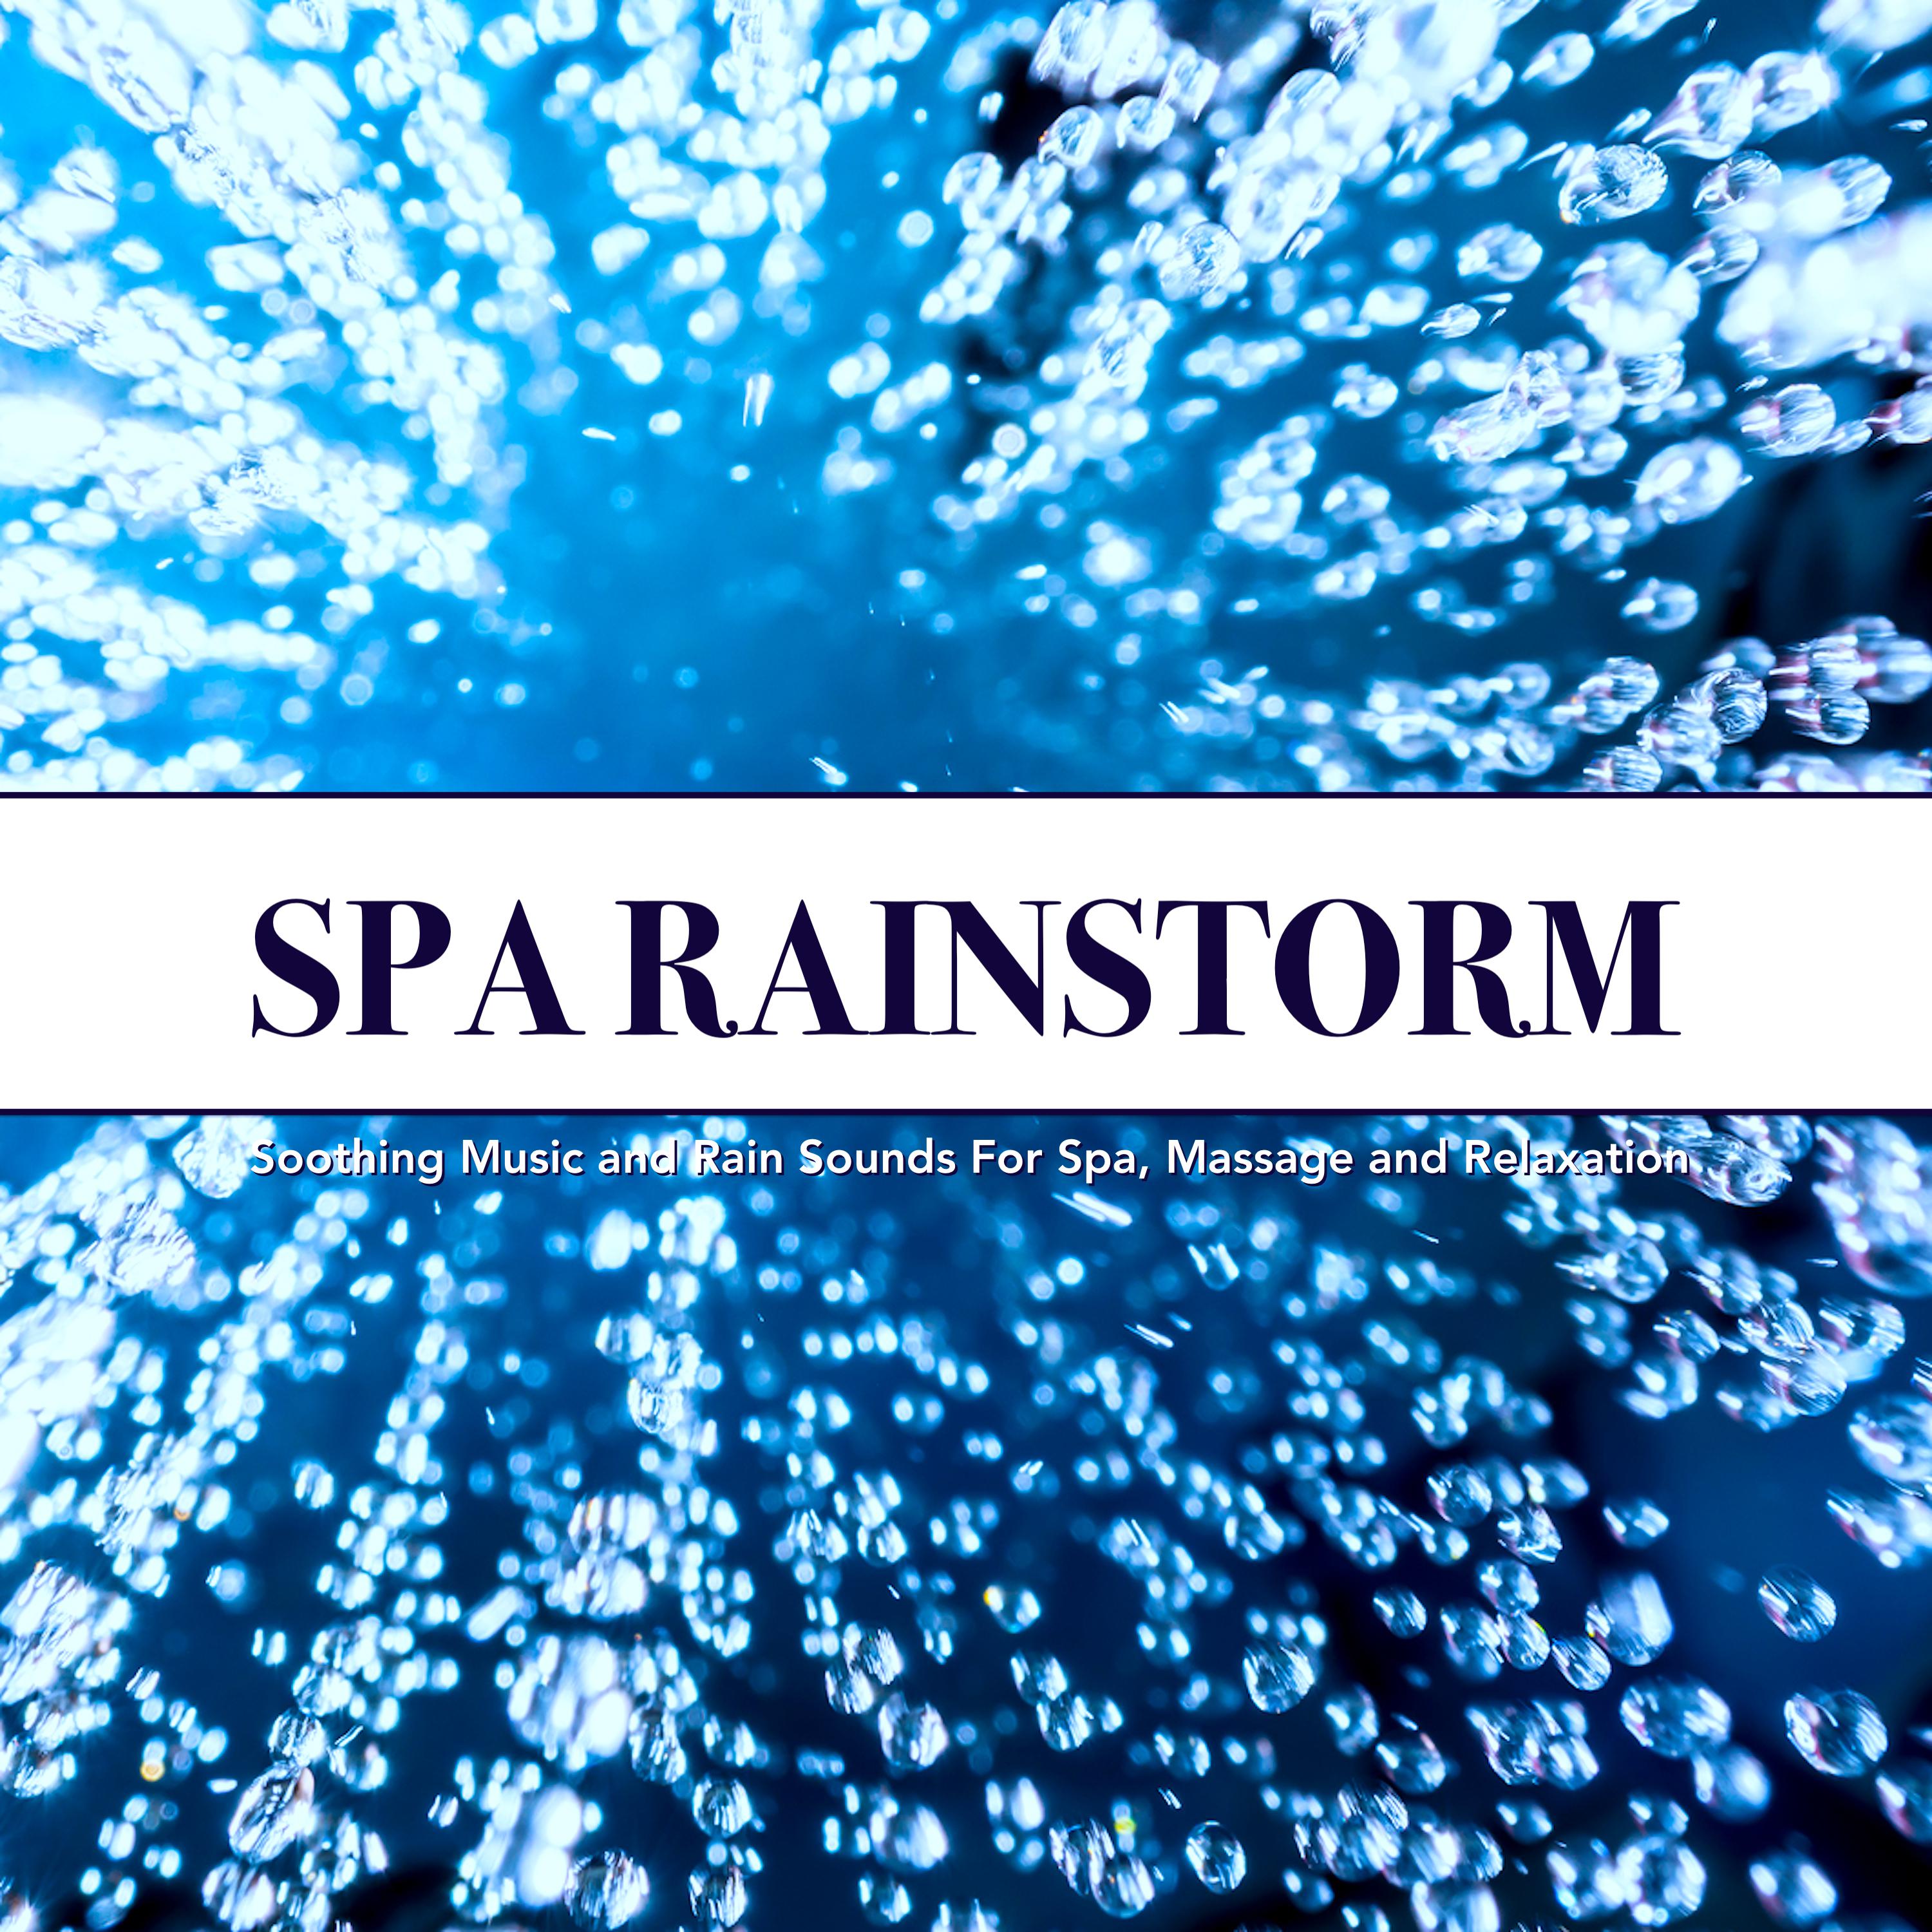 Spa Rainstorm: Soothing Music and Rain Sounds For Spa, Massage and Relaxation